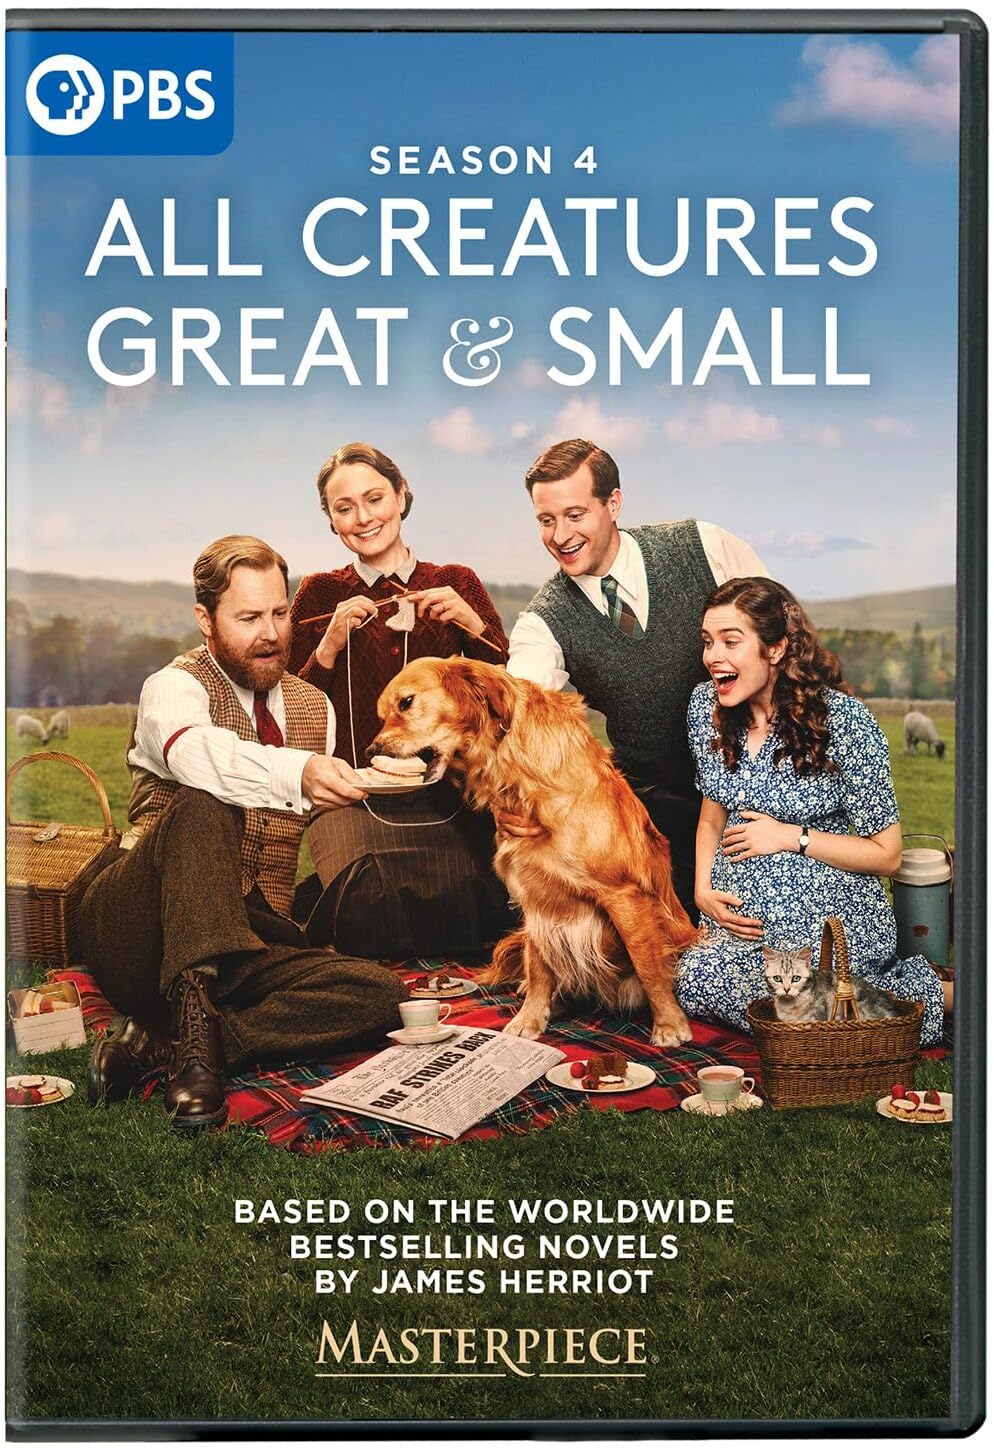 Image for "All creatures great and small Season 4"